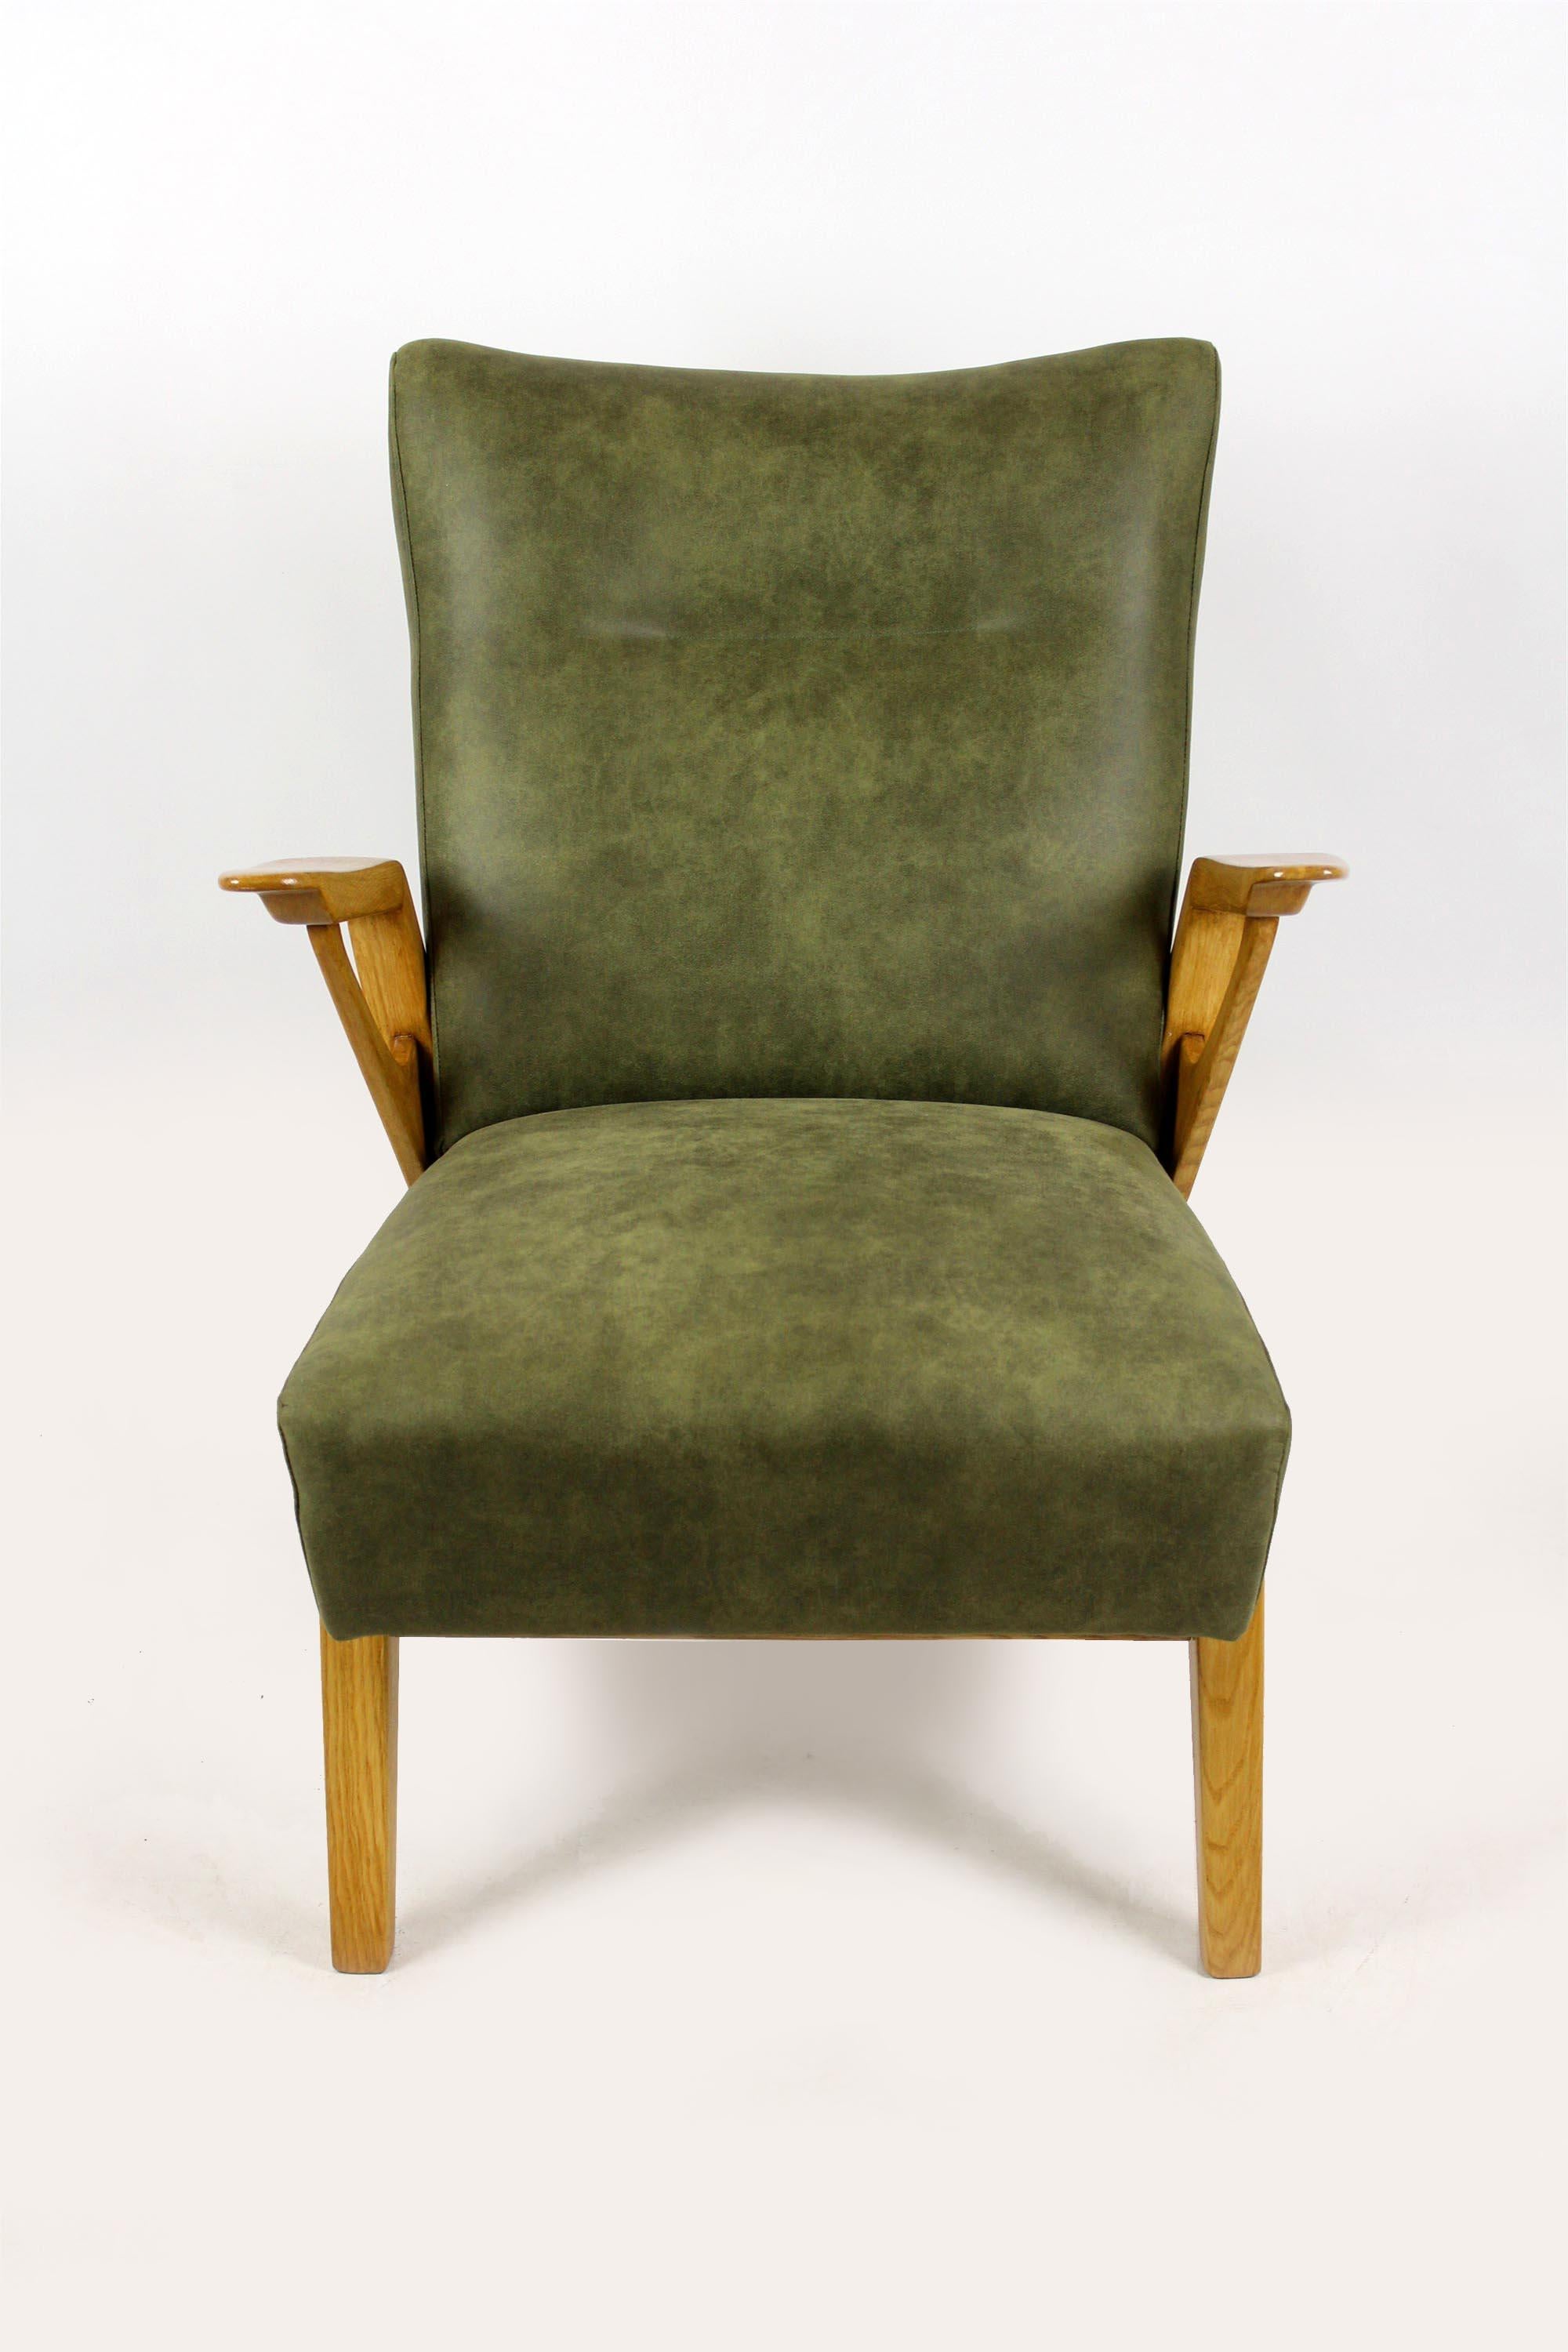 – A unique armchair from the mid 1960s
– Made of ash wood
- Feature spring mattresses
– The armchair has been completely restored.